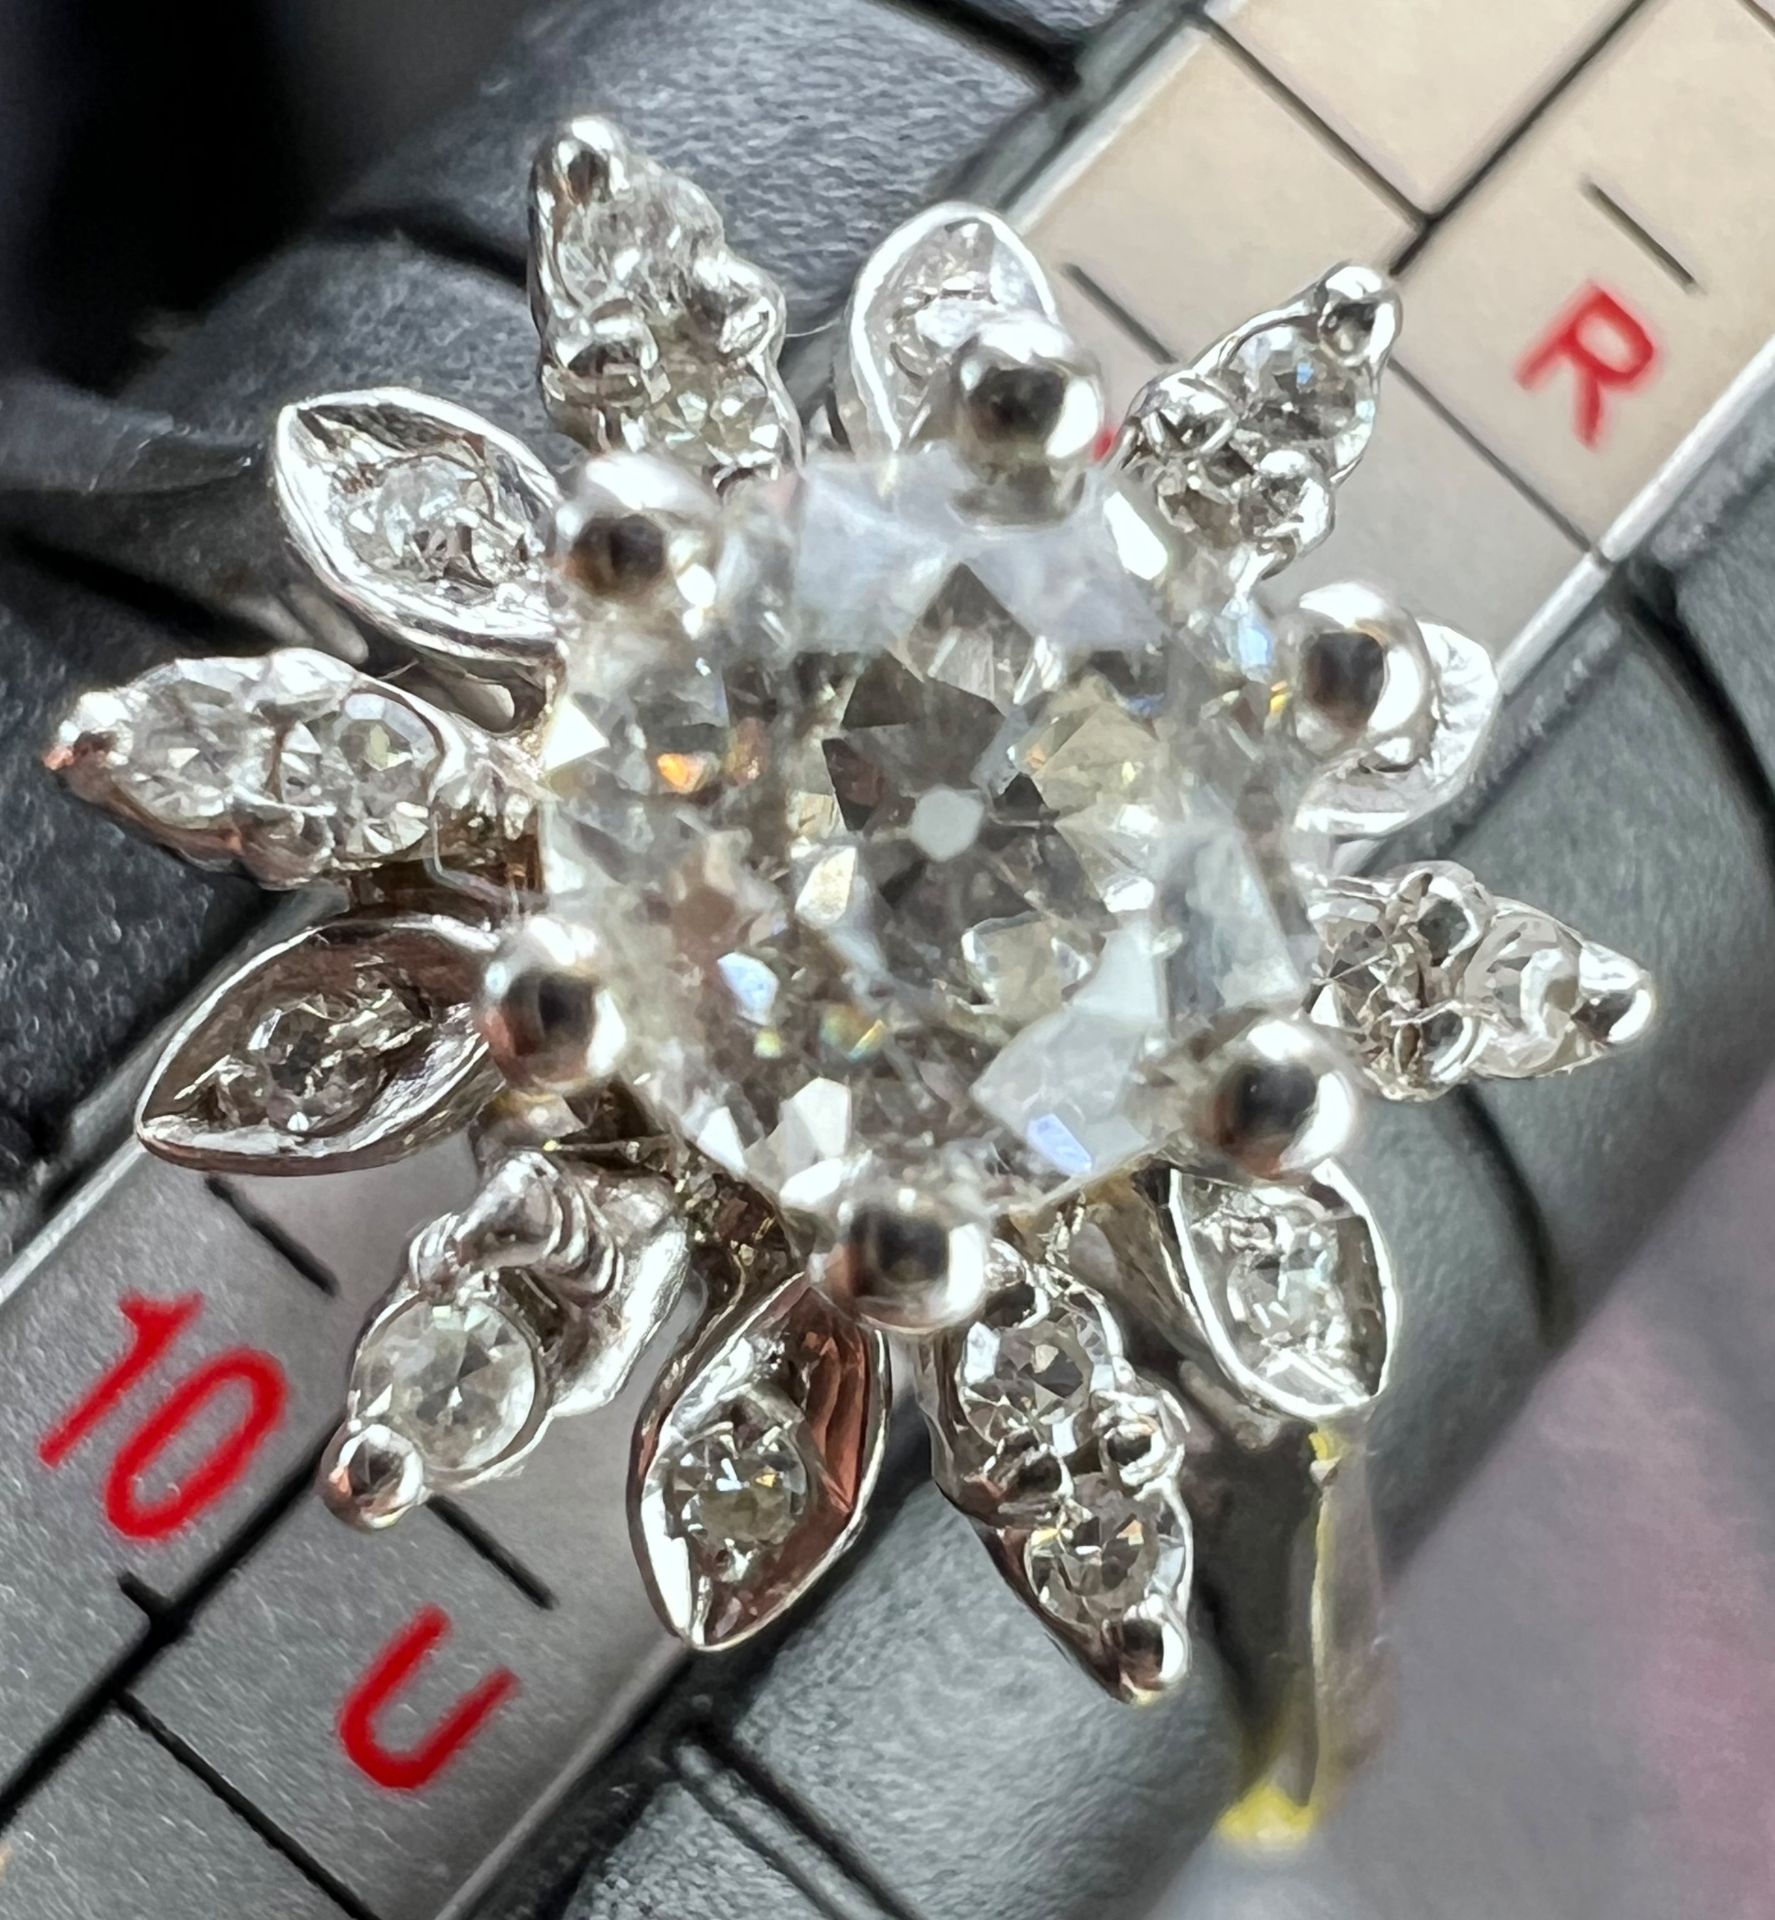 Ladies' ring in flower shape. 585 white gold with 13 diamonds. - Image 7 of 9